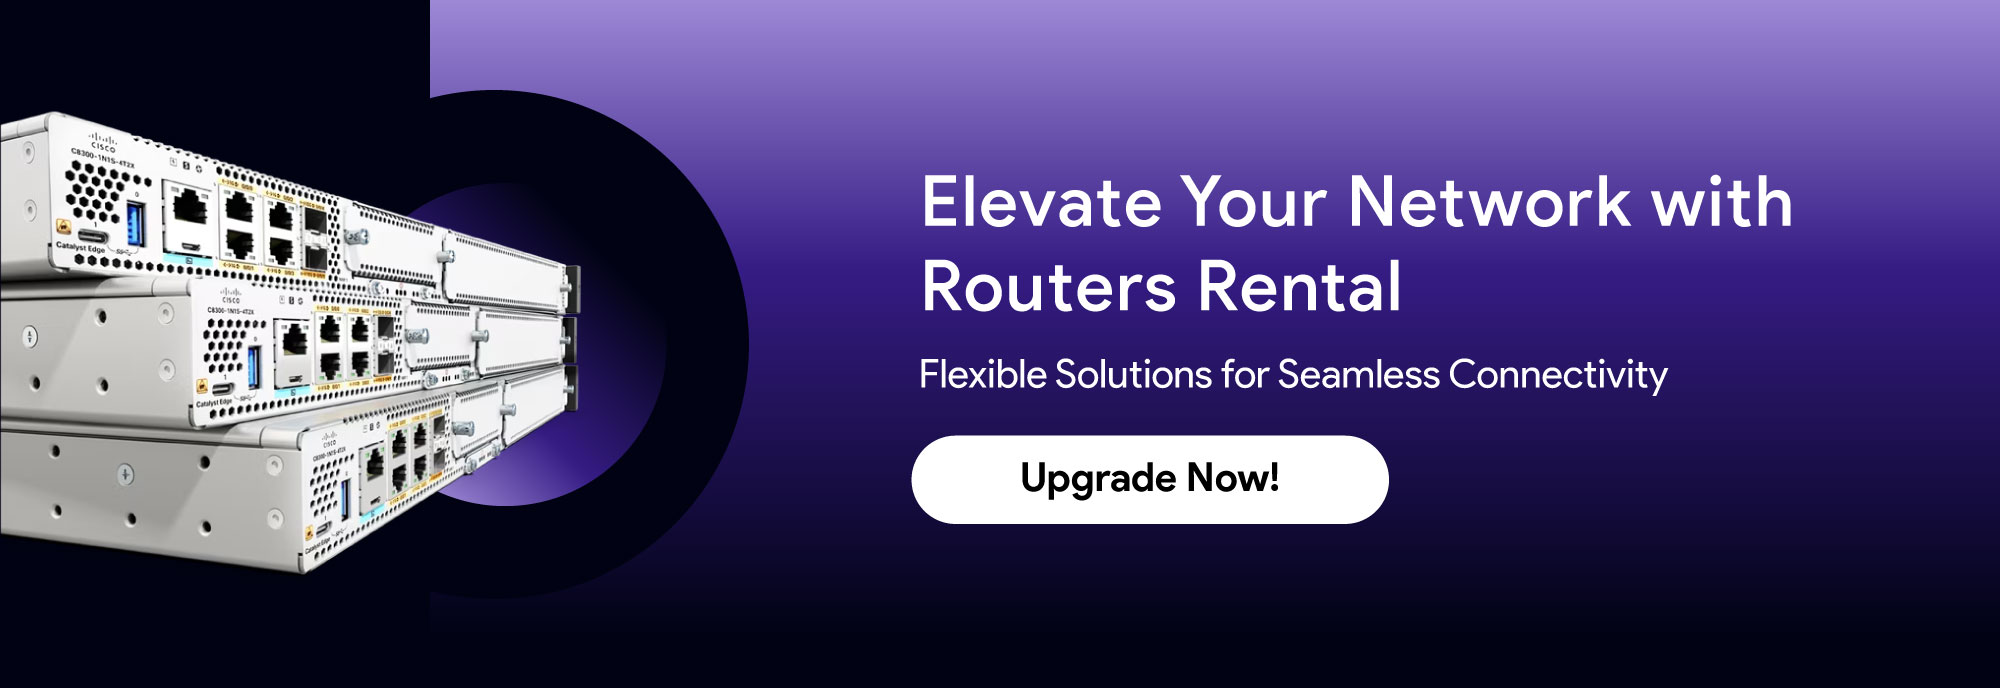 Routers-Rental